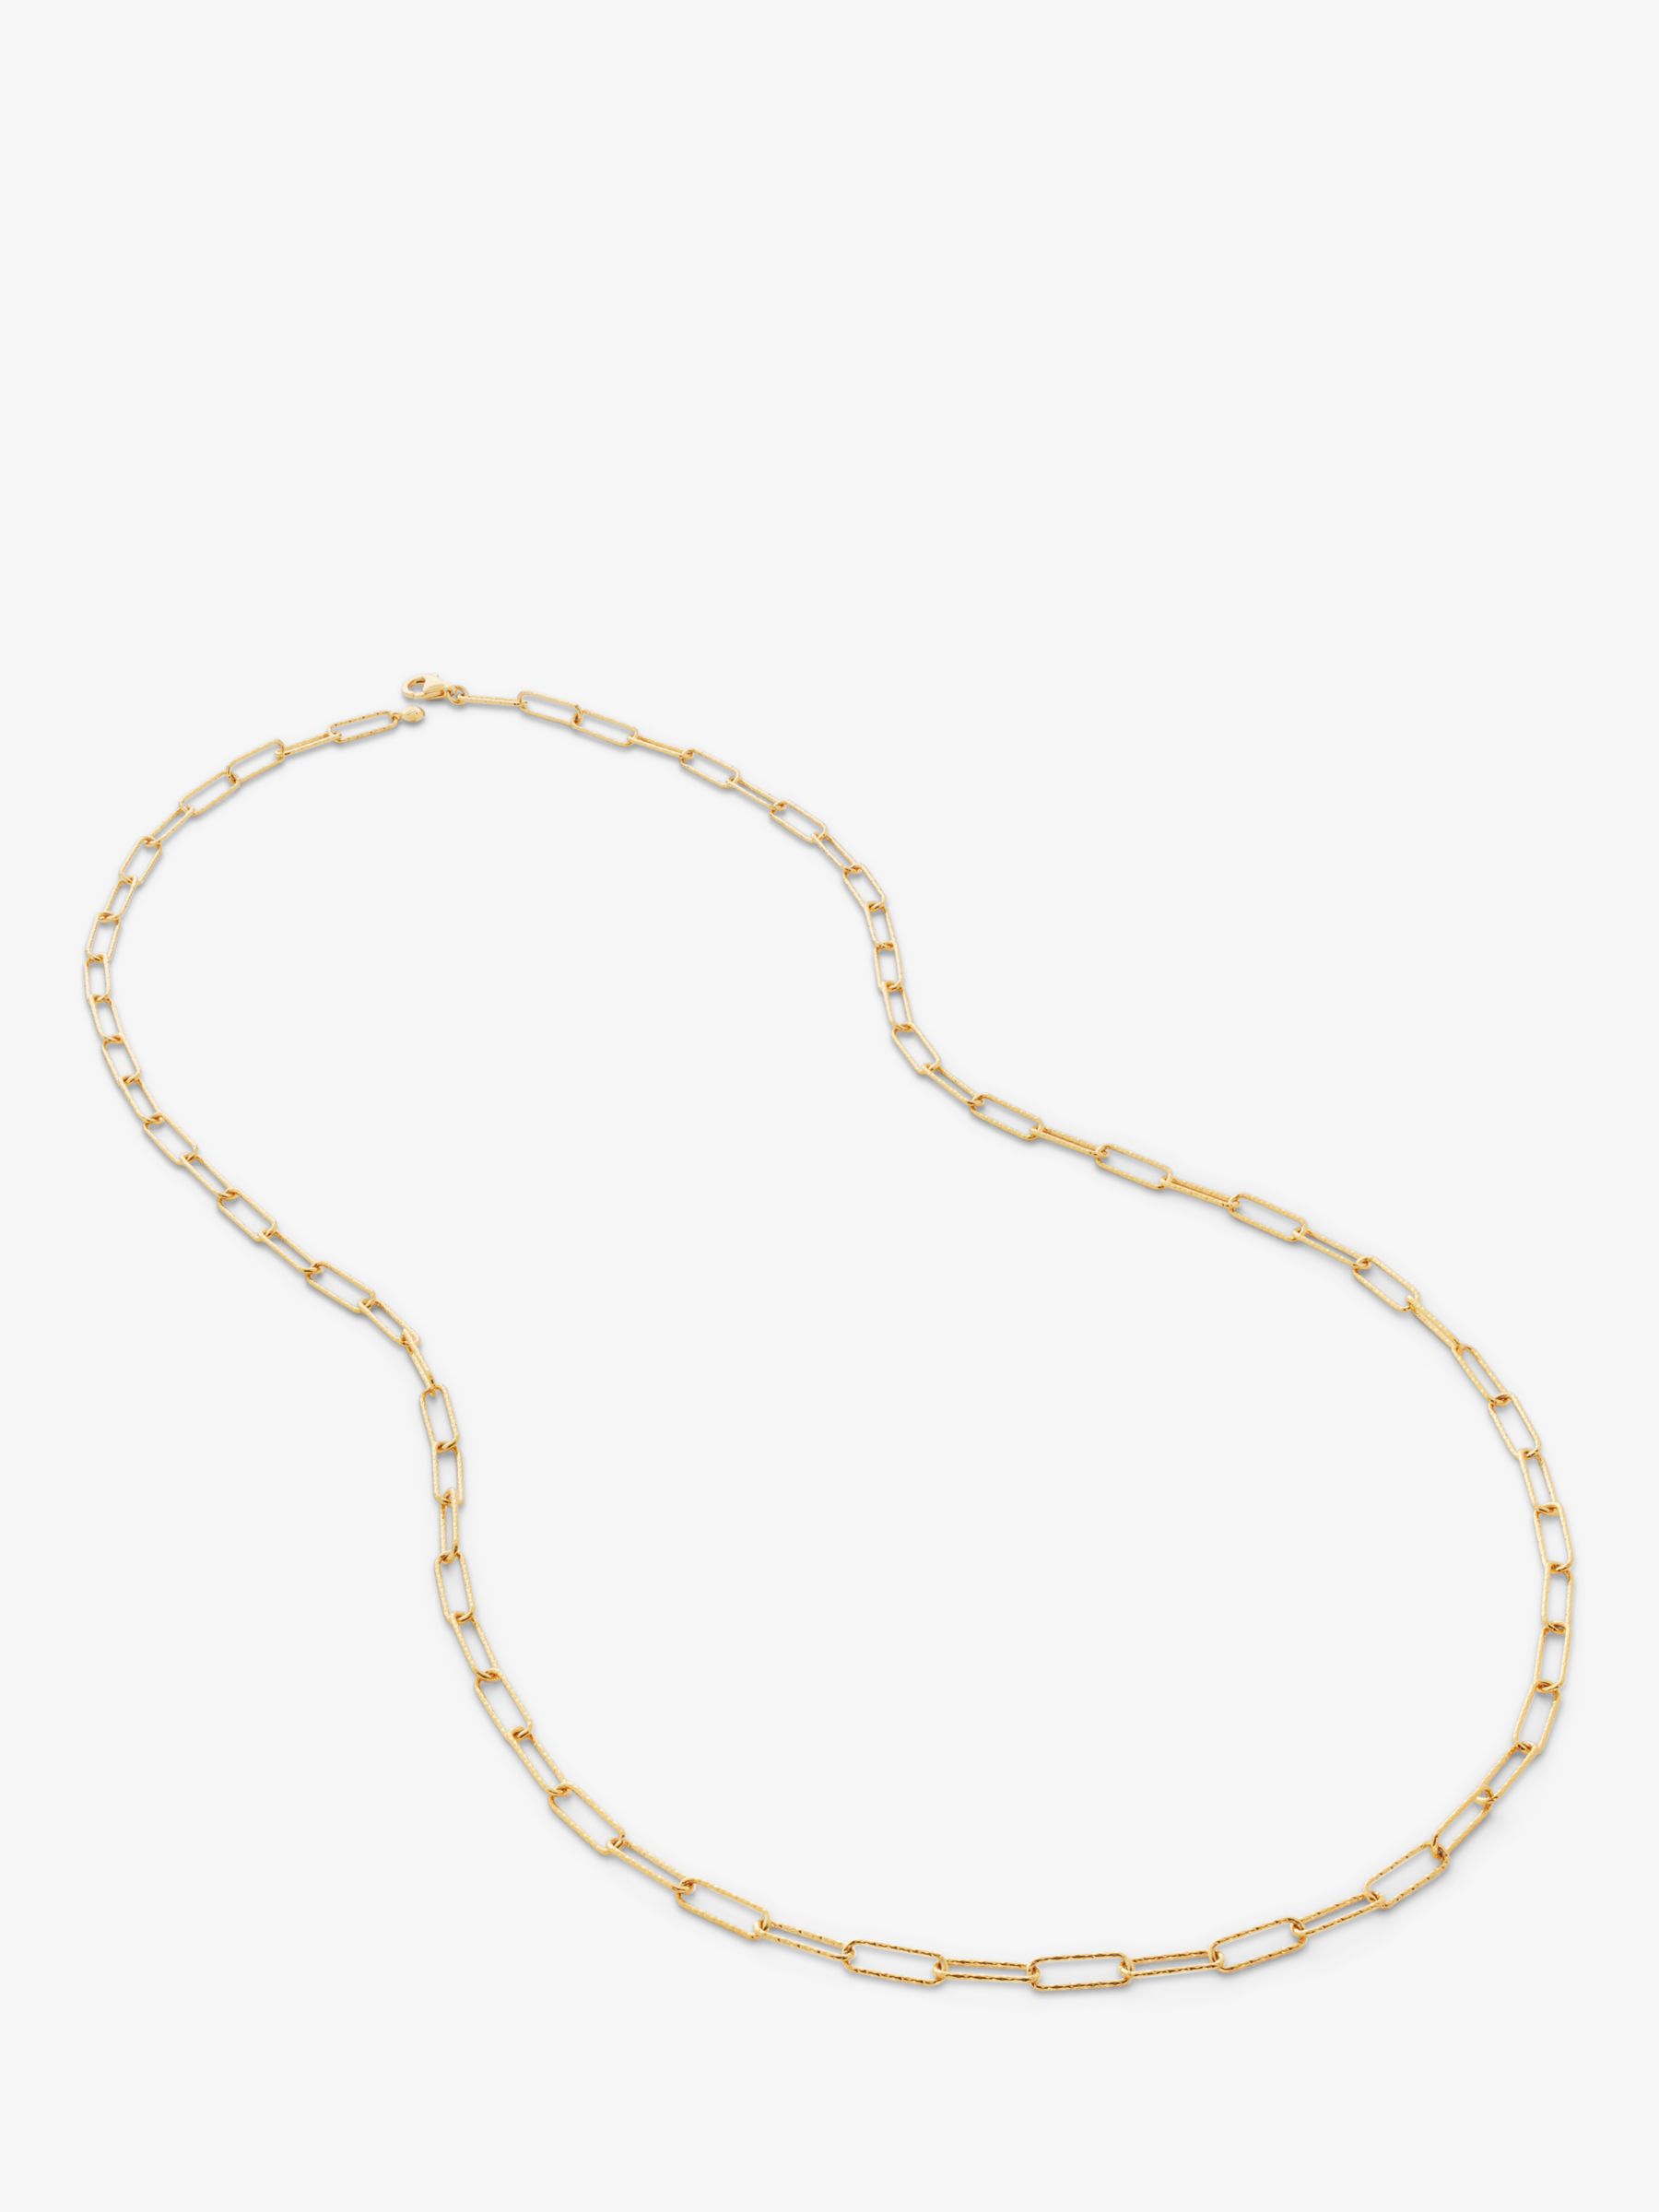 Monica Vinader Alta Textured Long Chain Necklace, Gold